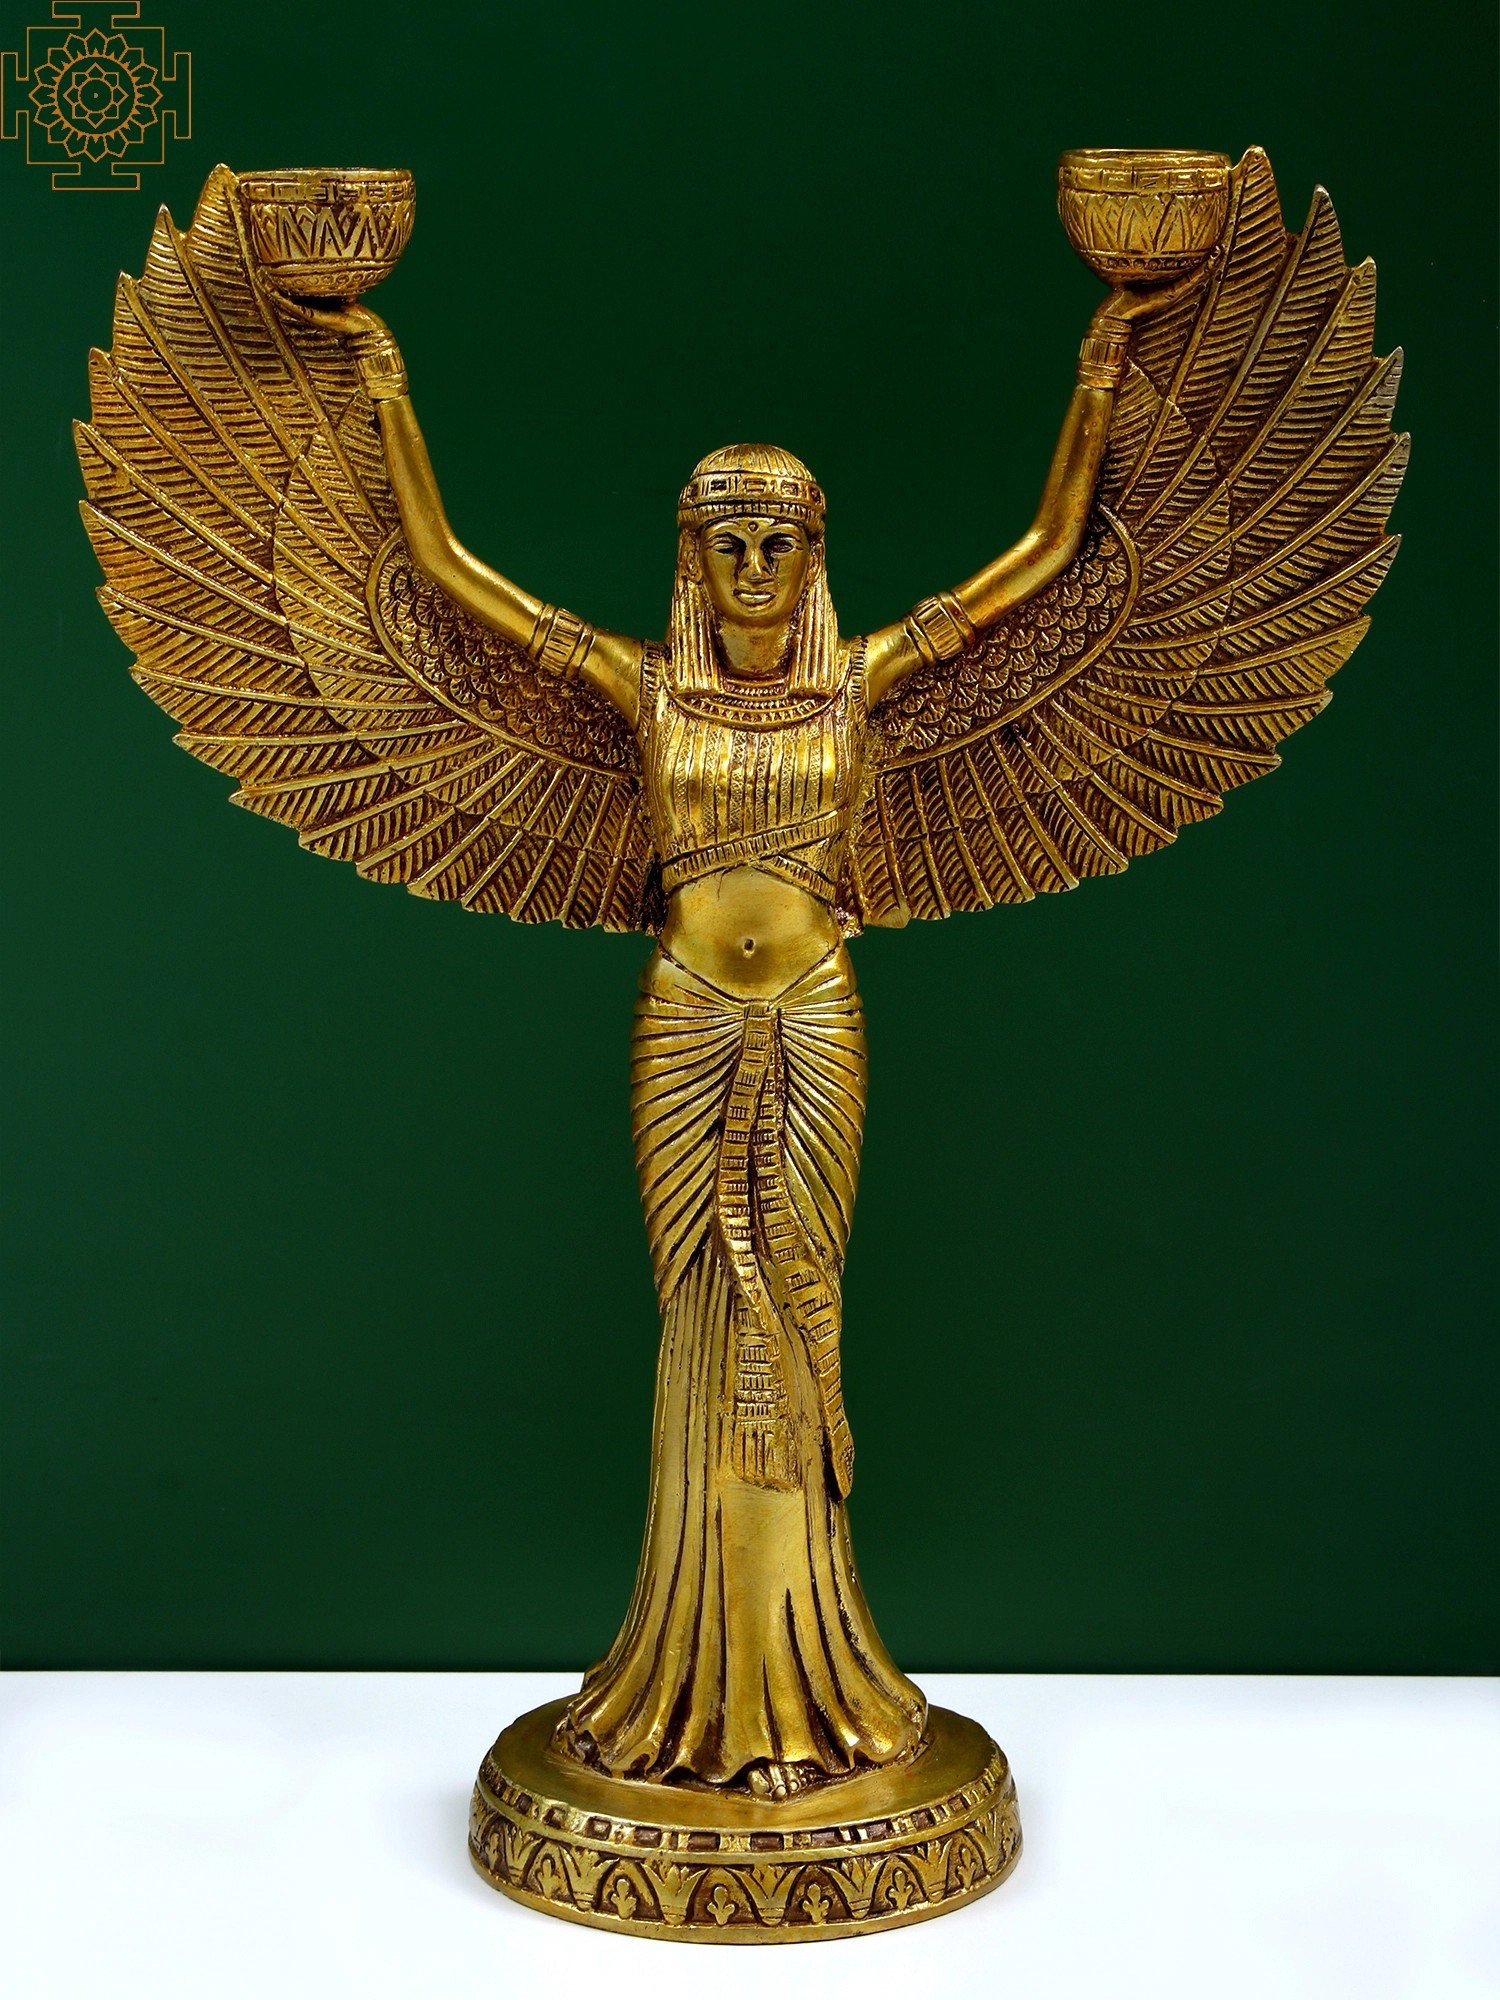 What is the goddess Isis?